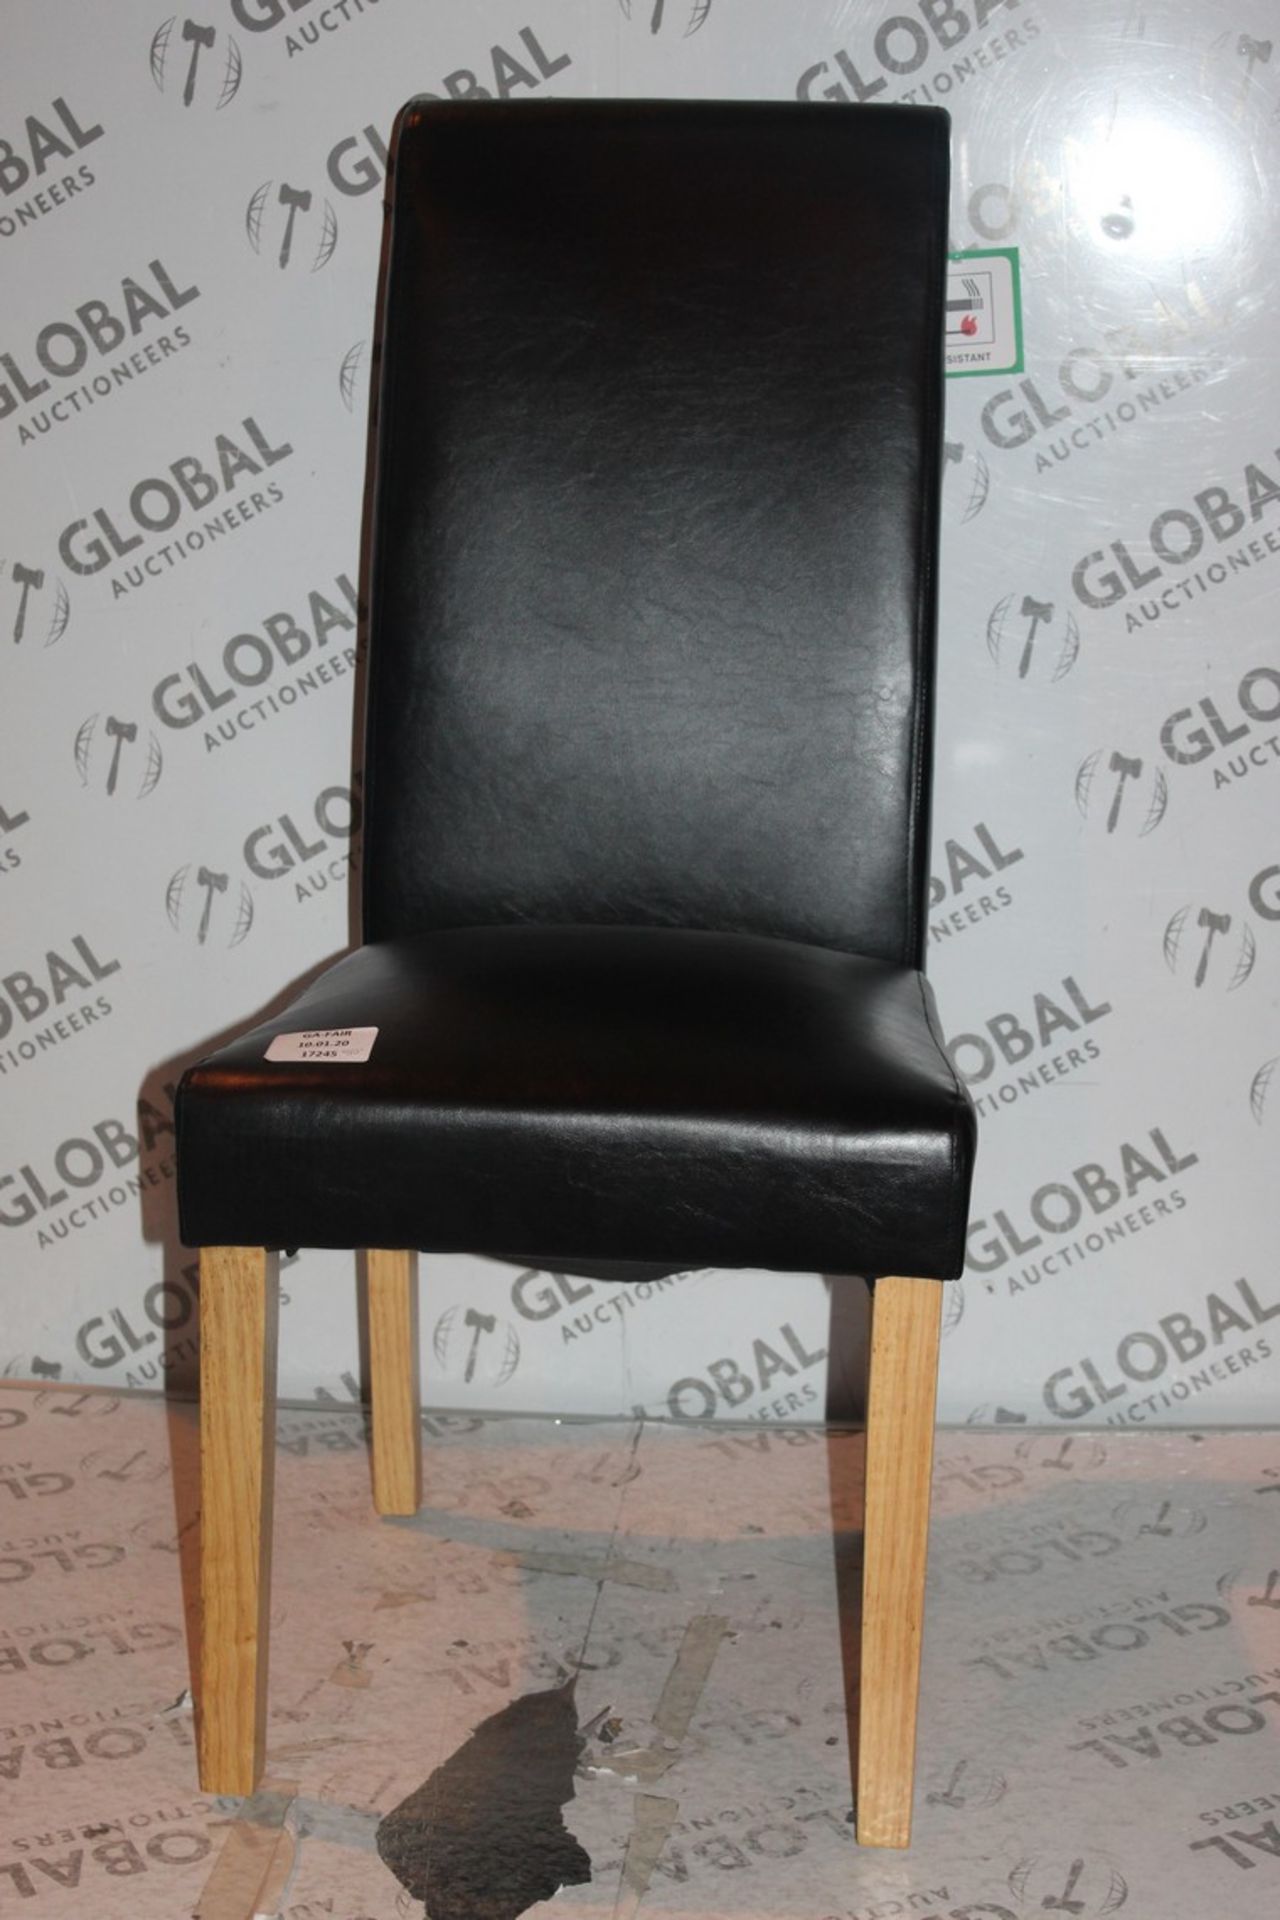 Pair Of Black PU Wooden Dining Chairs Combined RRP £100 (17245) (10.01.20) (Public Viewing and